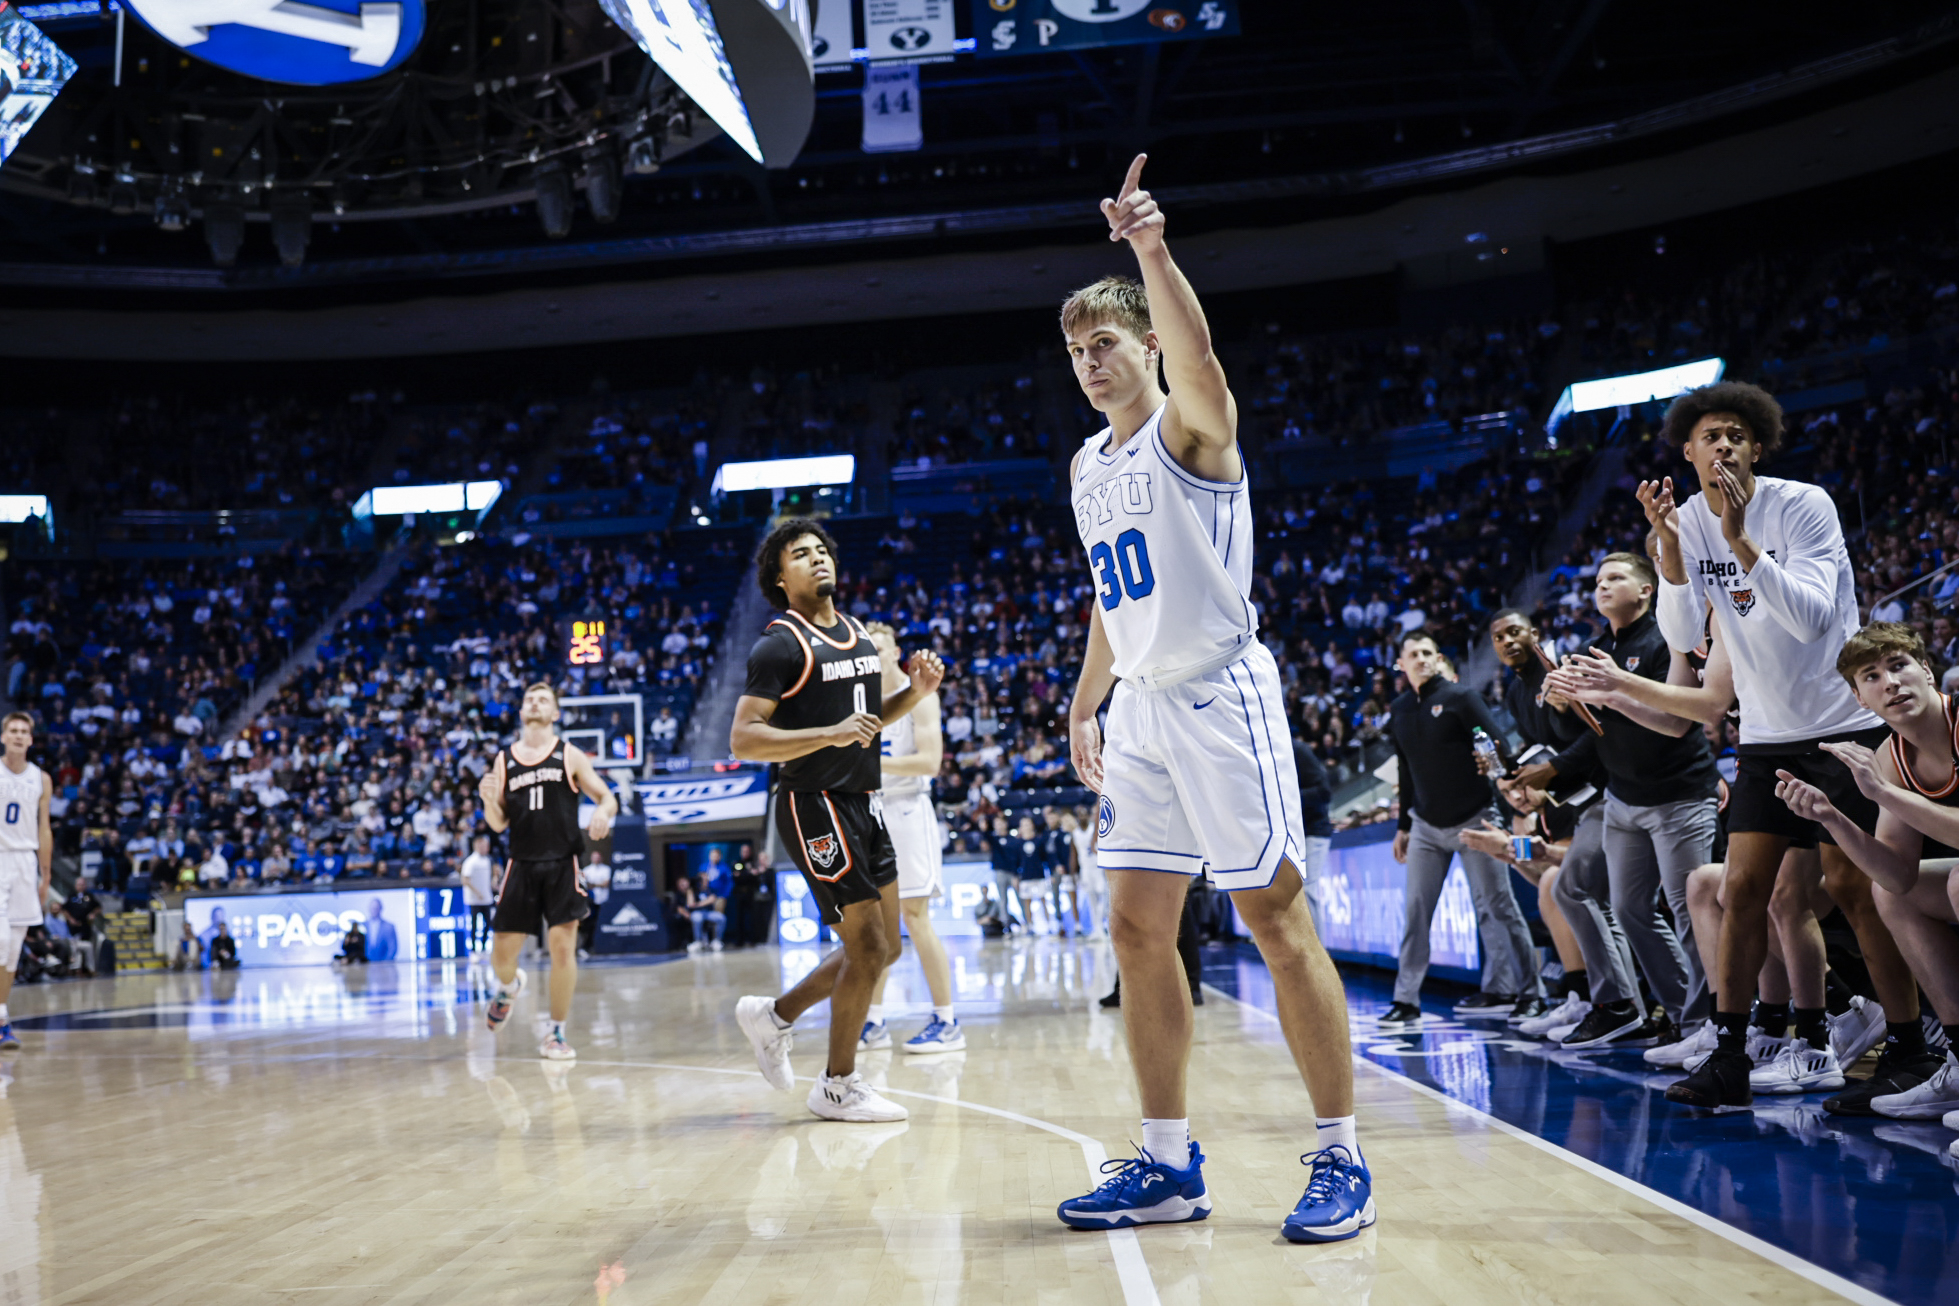 Dallin Hall points to the crowd during a game against Idaho State at the Marriott Center.